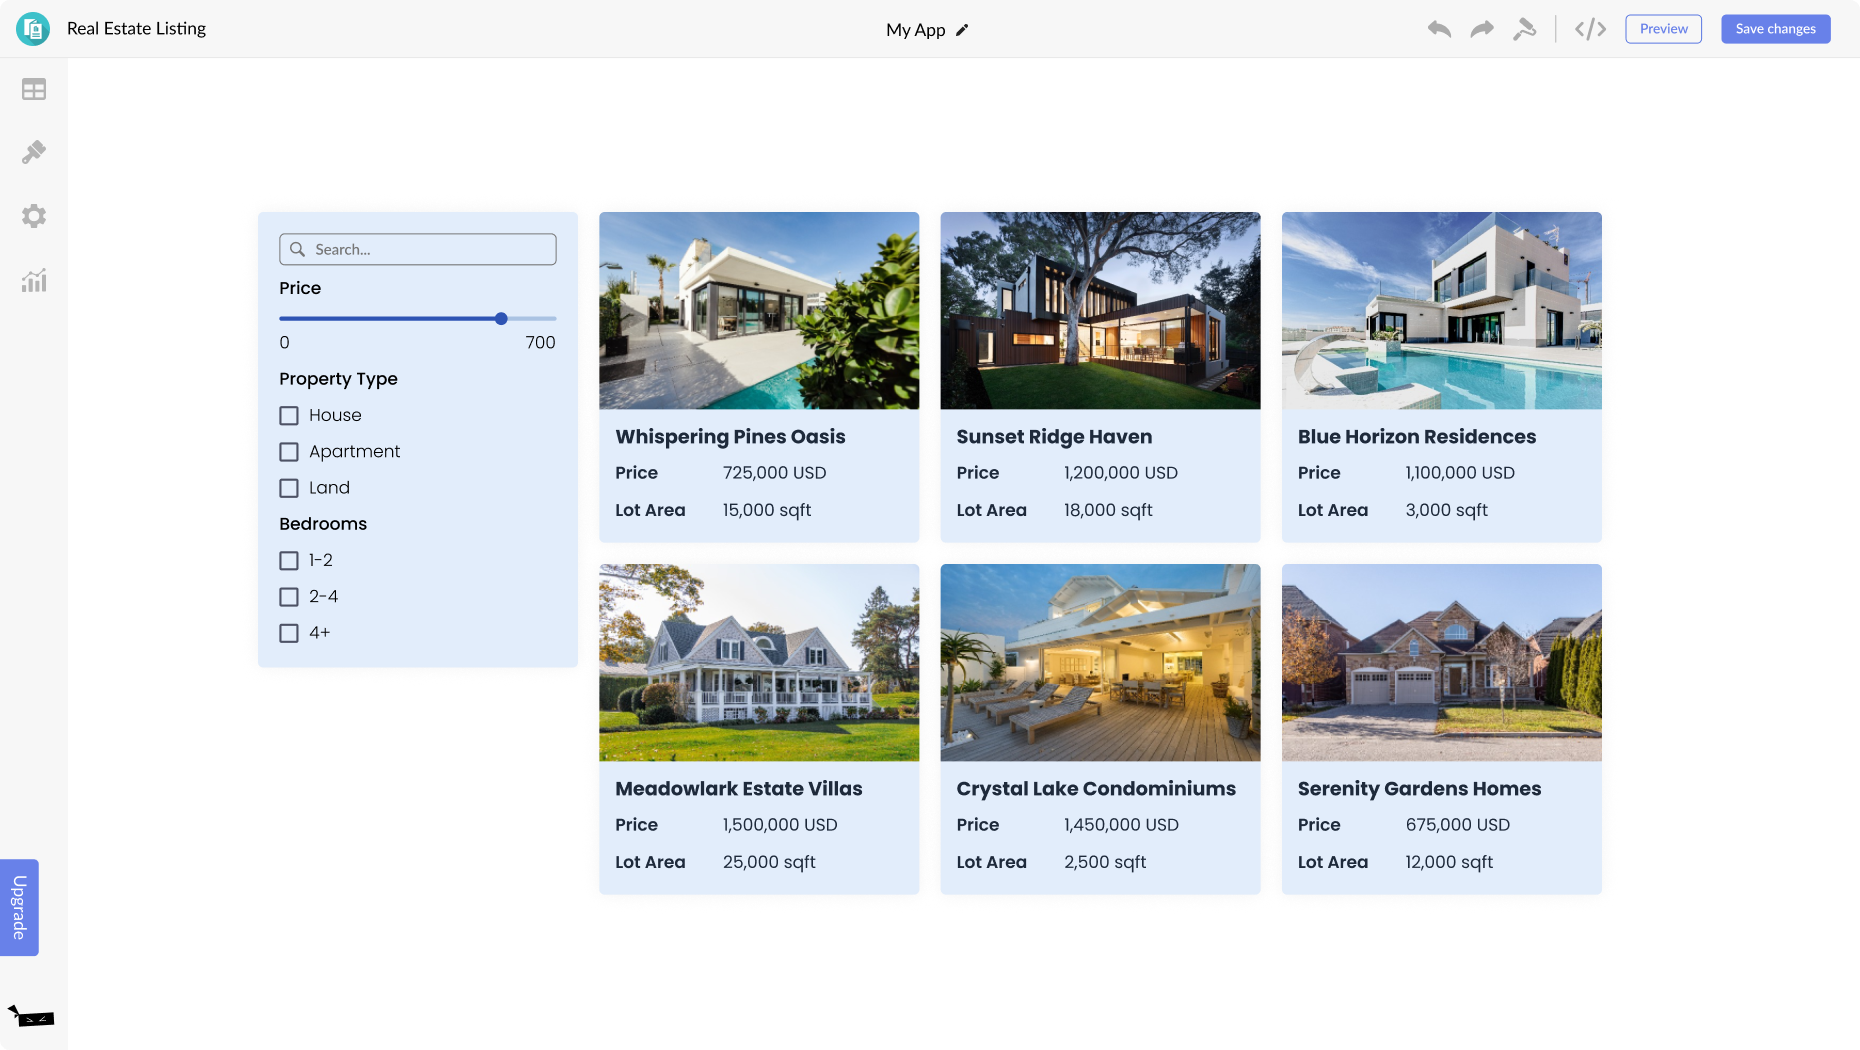 Real Estate Listings for Bootstrap Studio